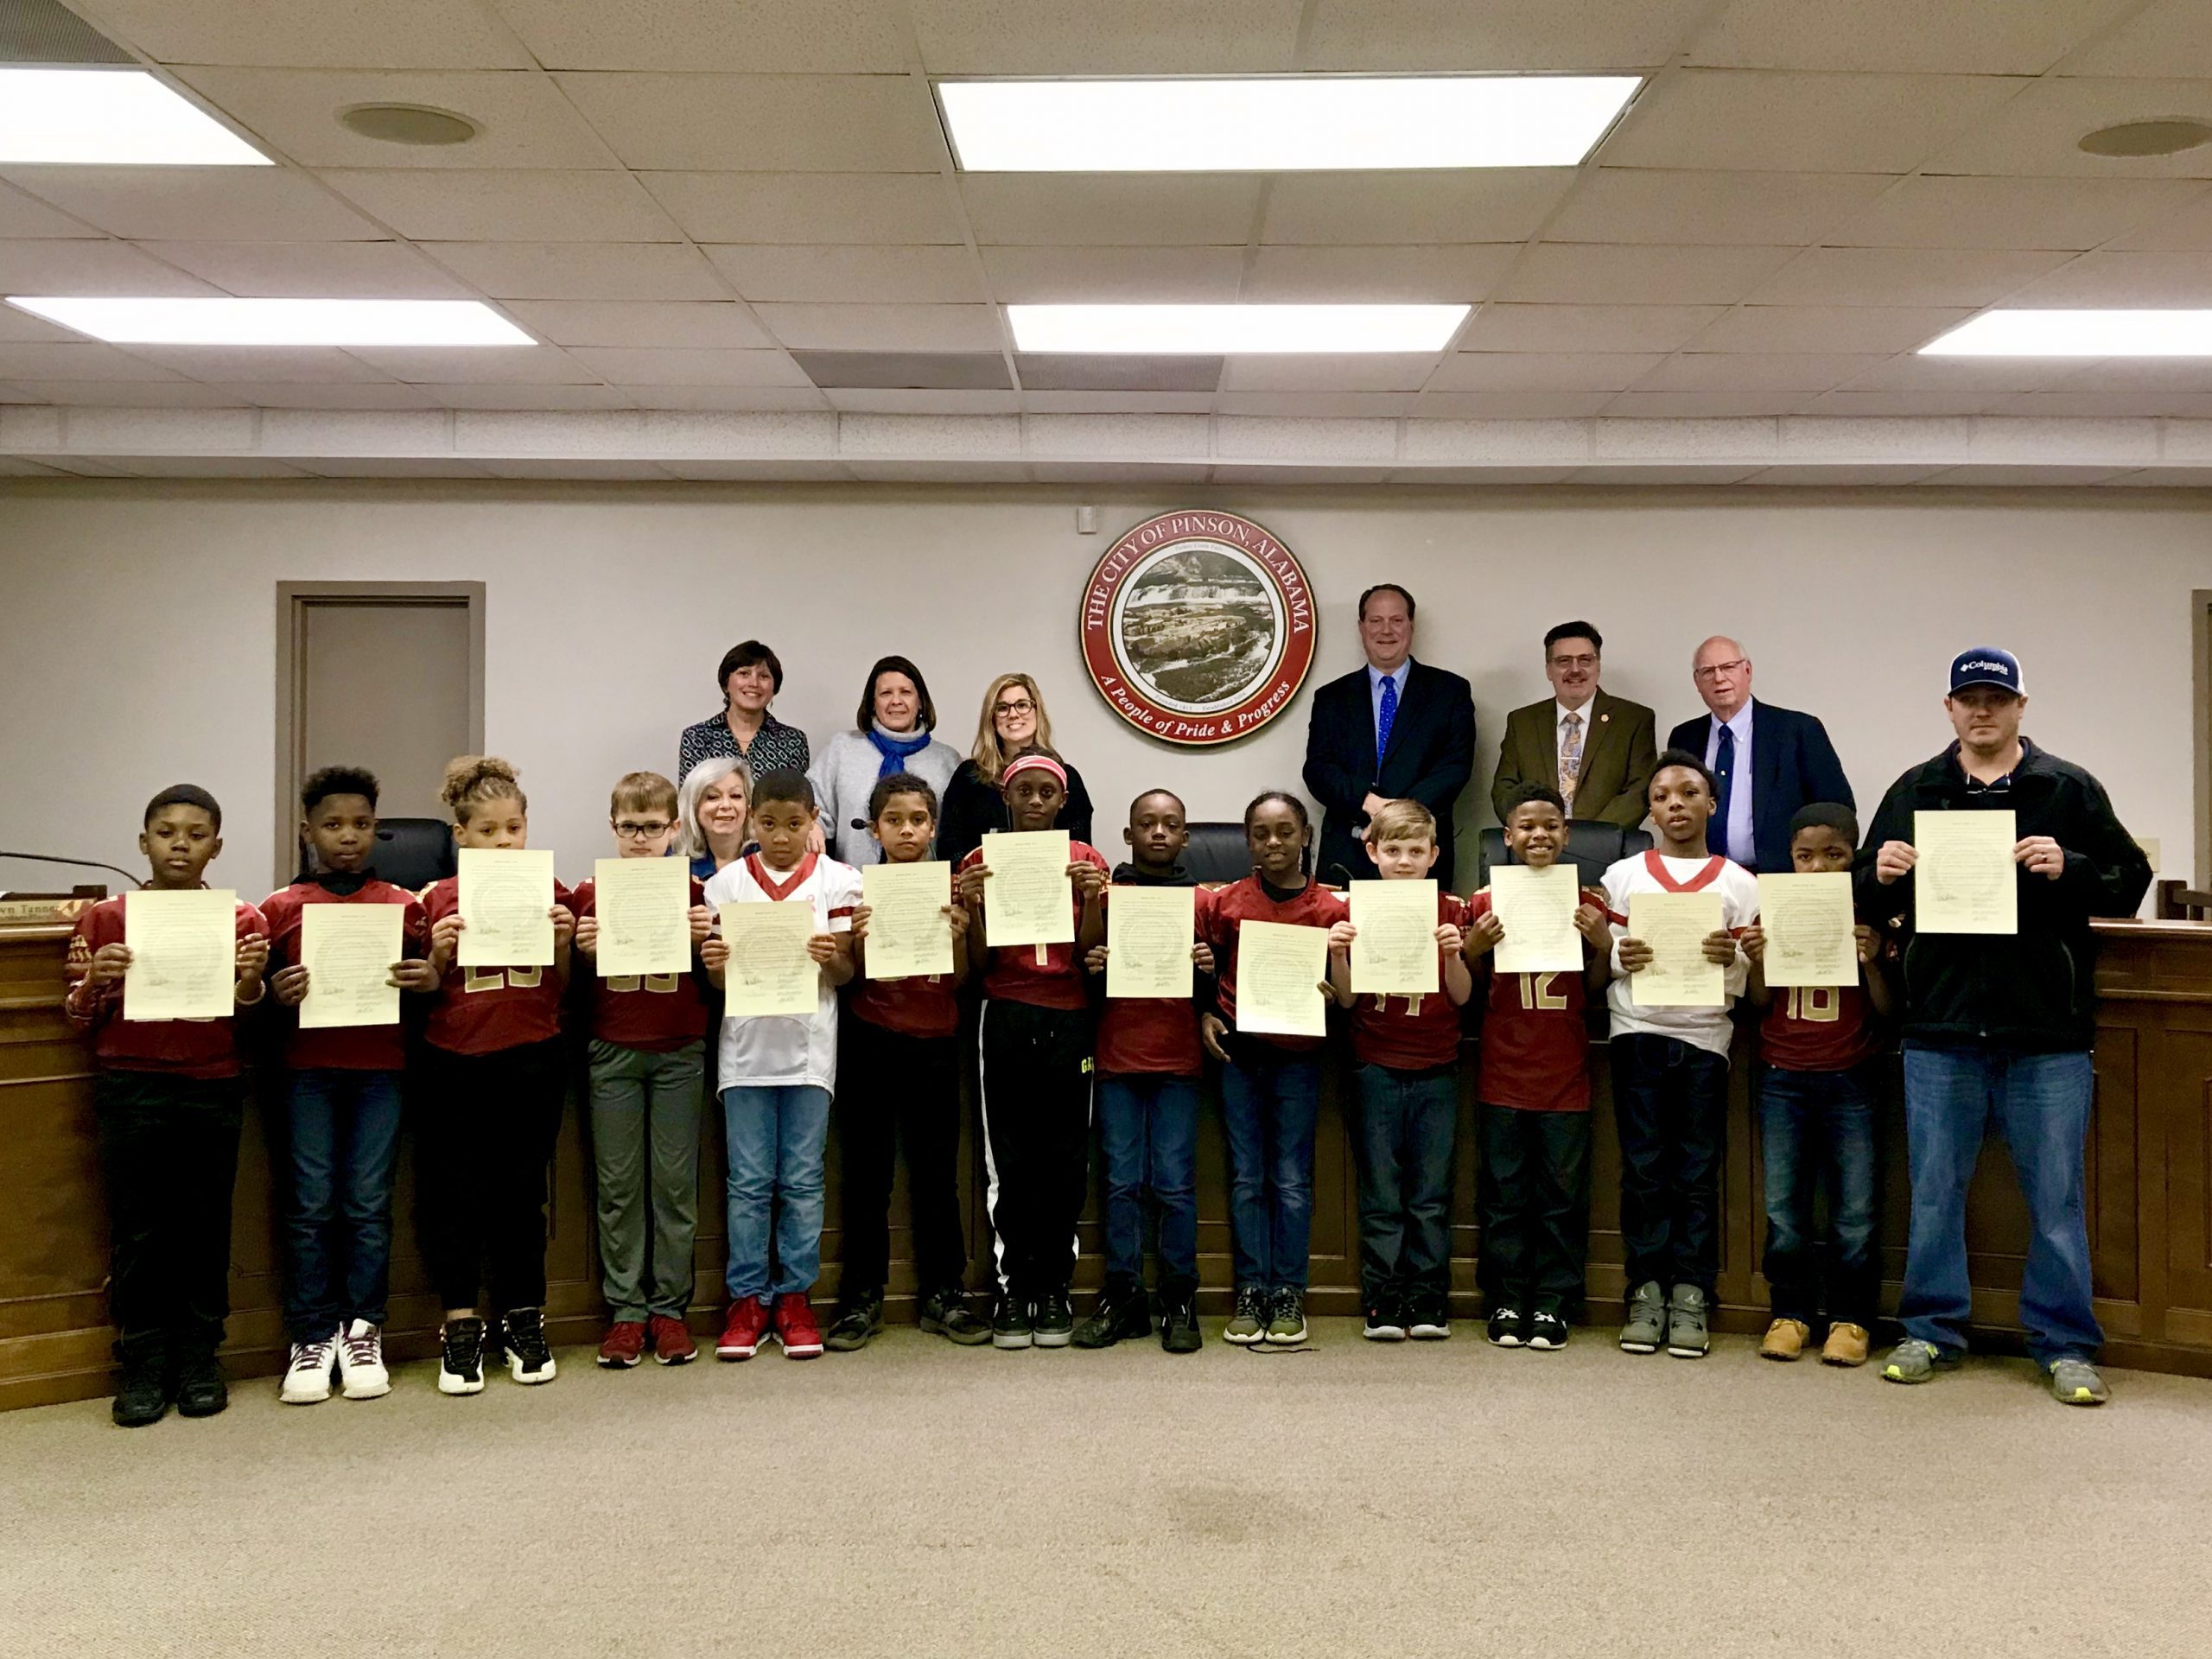 Pinson City Council recognizes PYS 10U Football team, hears report on future upgrades to sports complex